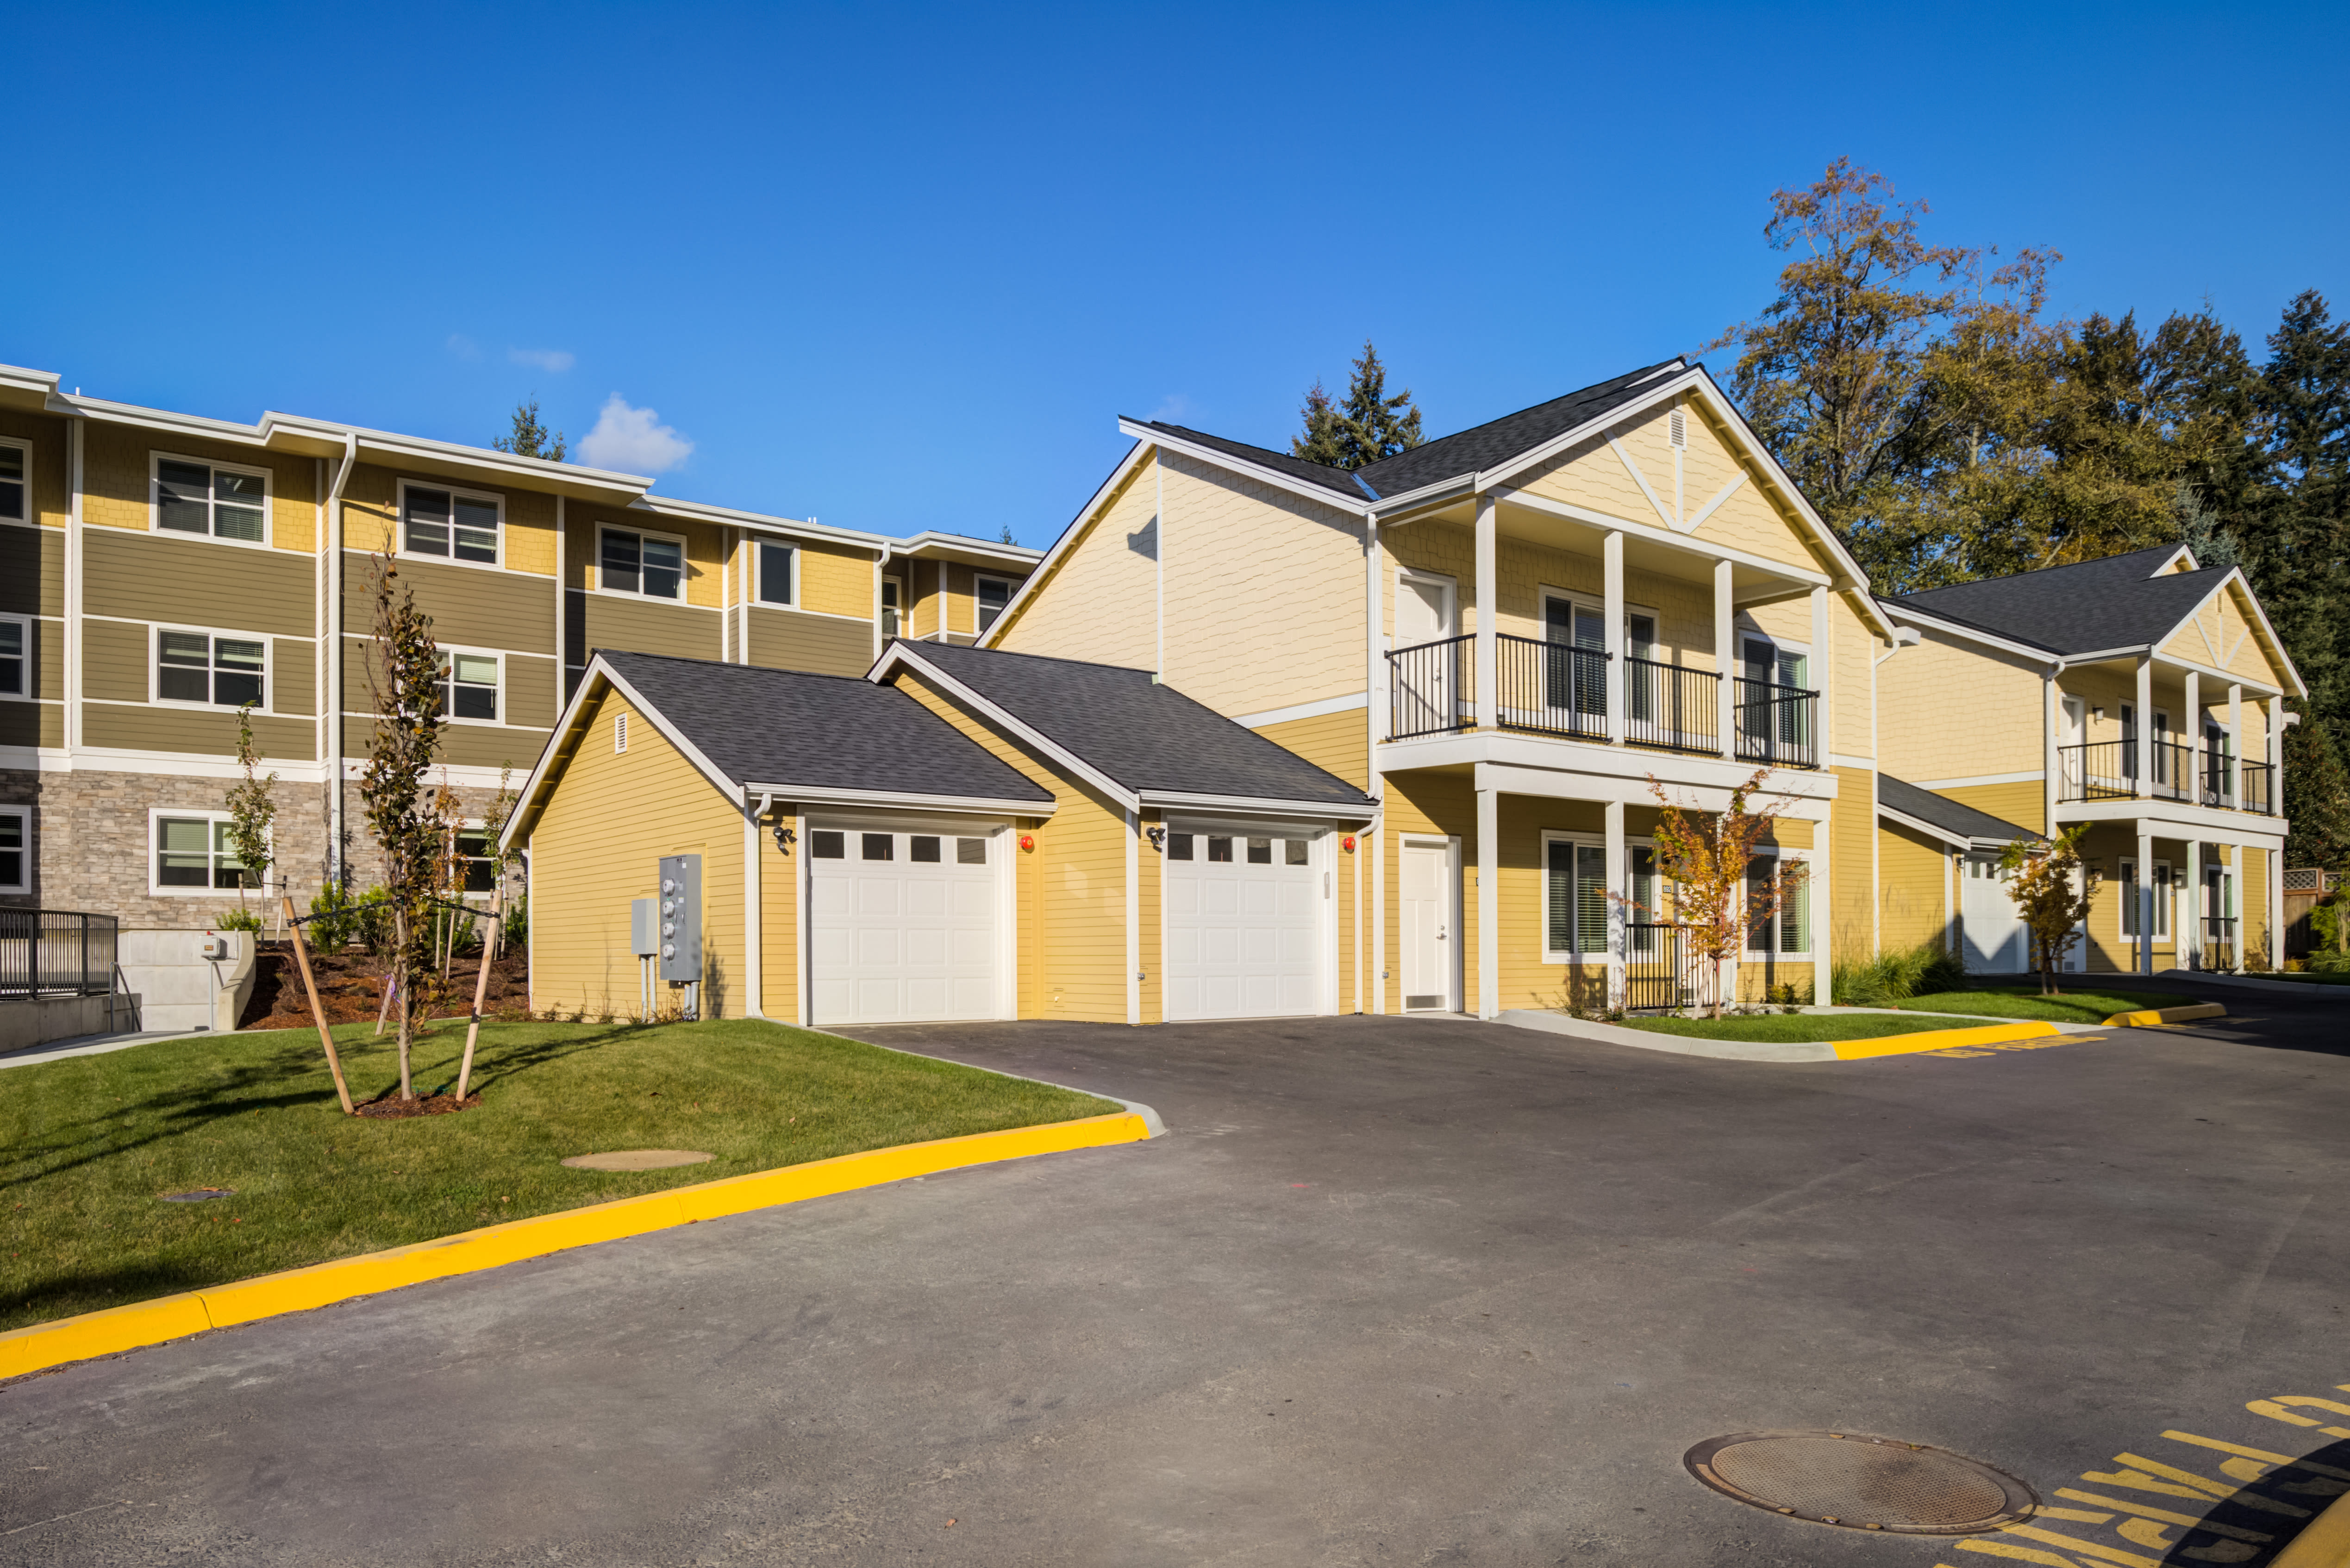 Independent Living Cottage Outside View at Mirror Lake Village Senior Living Community in Federal Way, WA